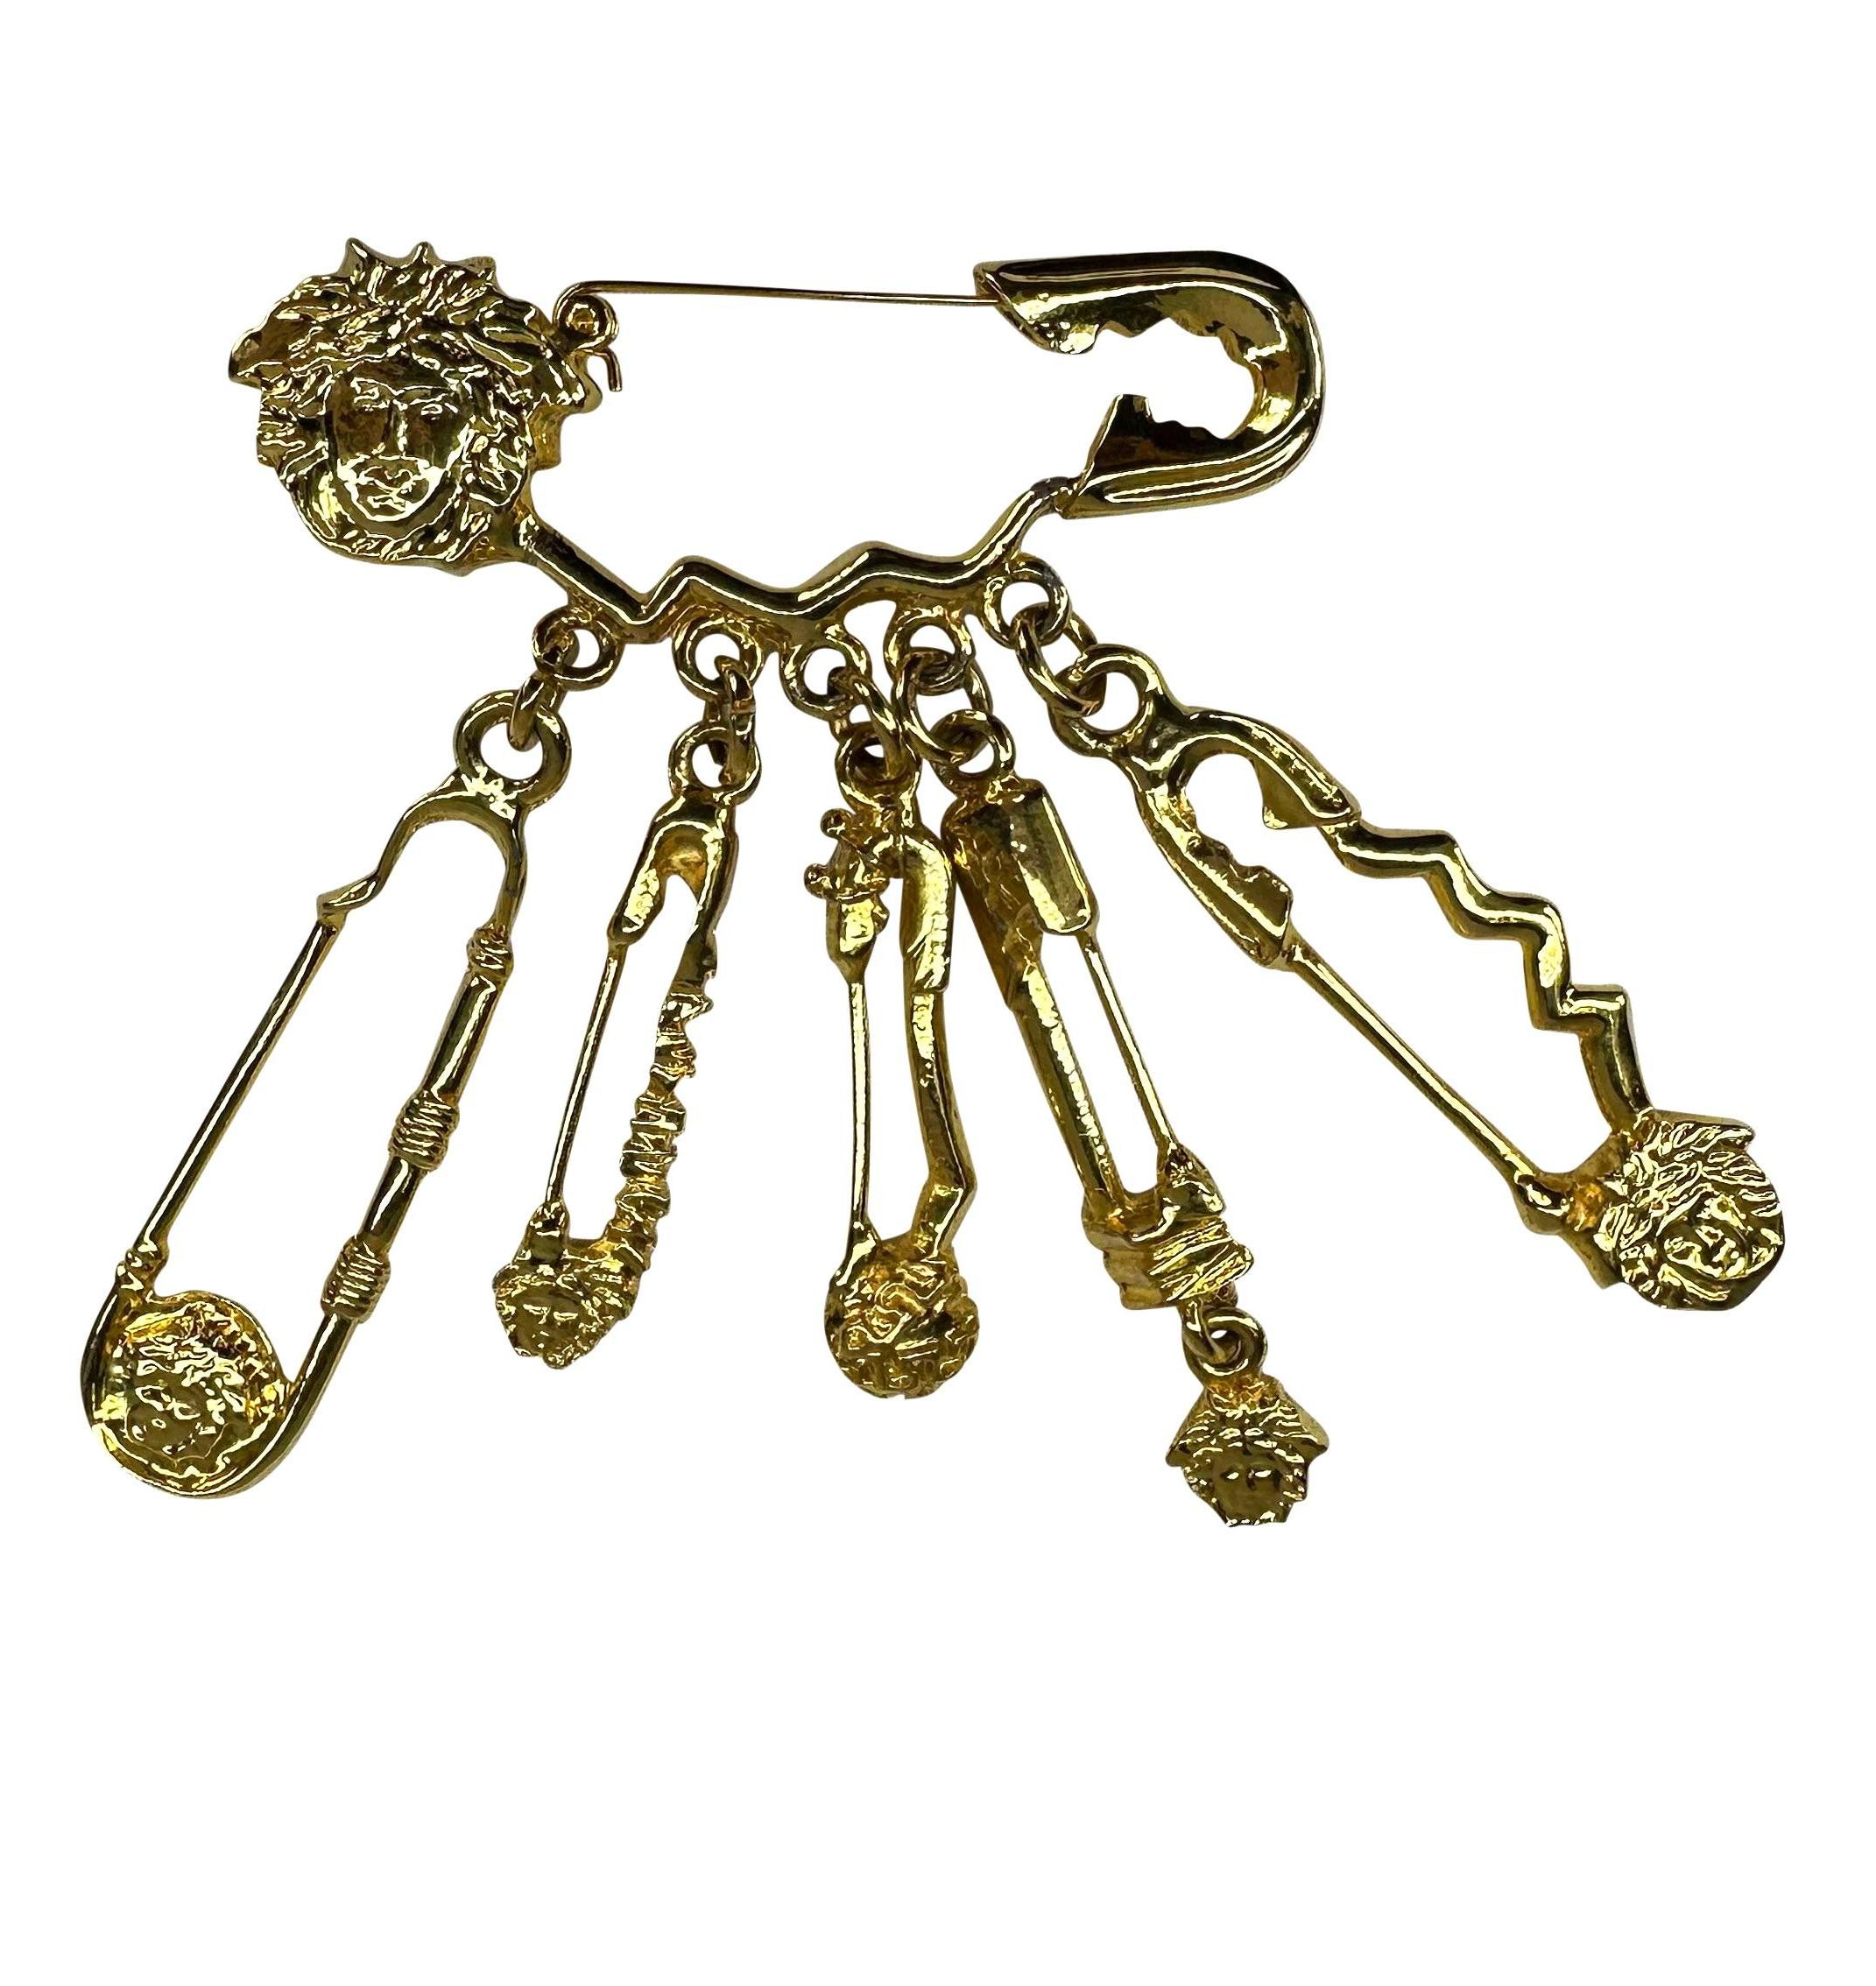 S/S 1994 Gianni Versace Gold Tone Medusa Logo Safety Pin Costume Brooch  For Sale 1